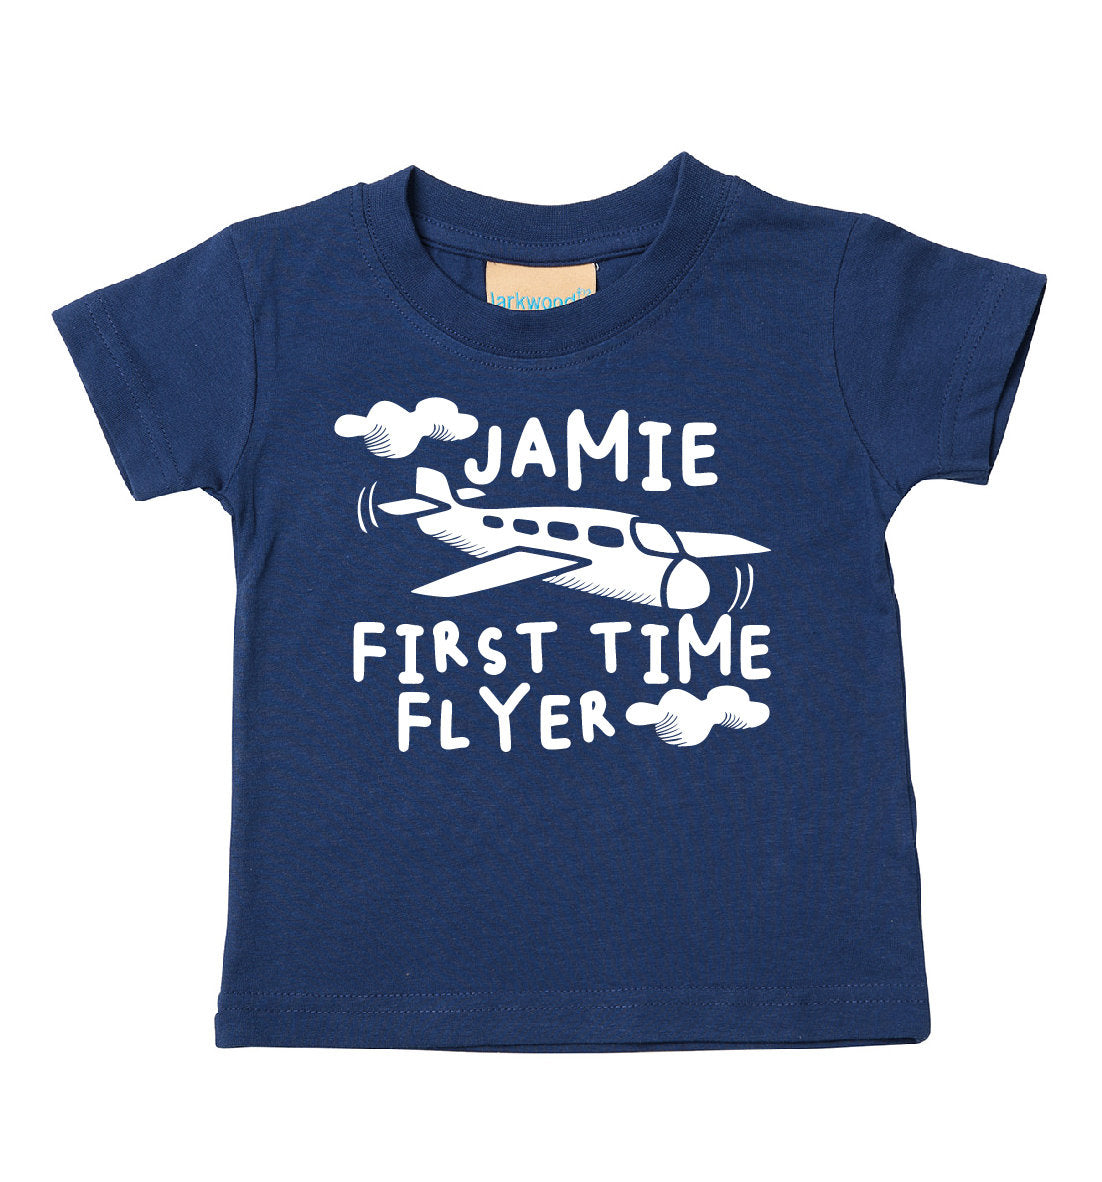 Kids Personalised First Time Flyer T-Shirt - Any Name Children's Holiday Vacation Tee